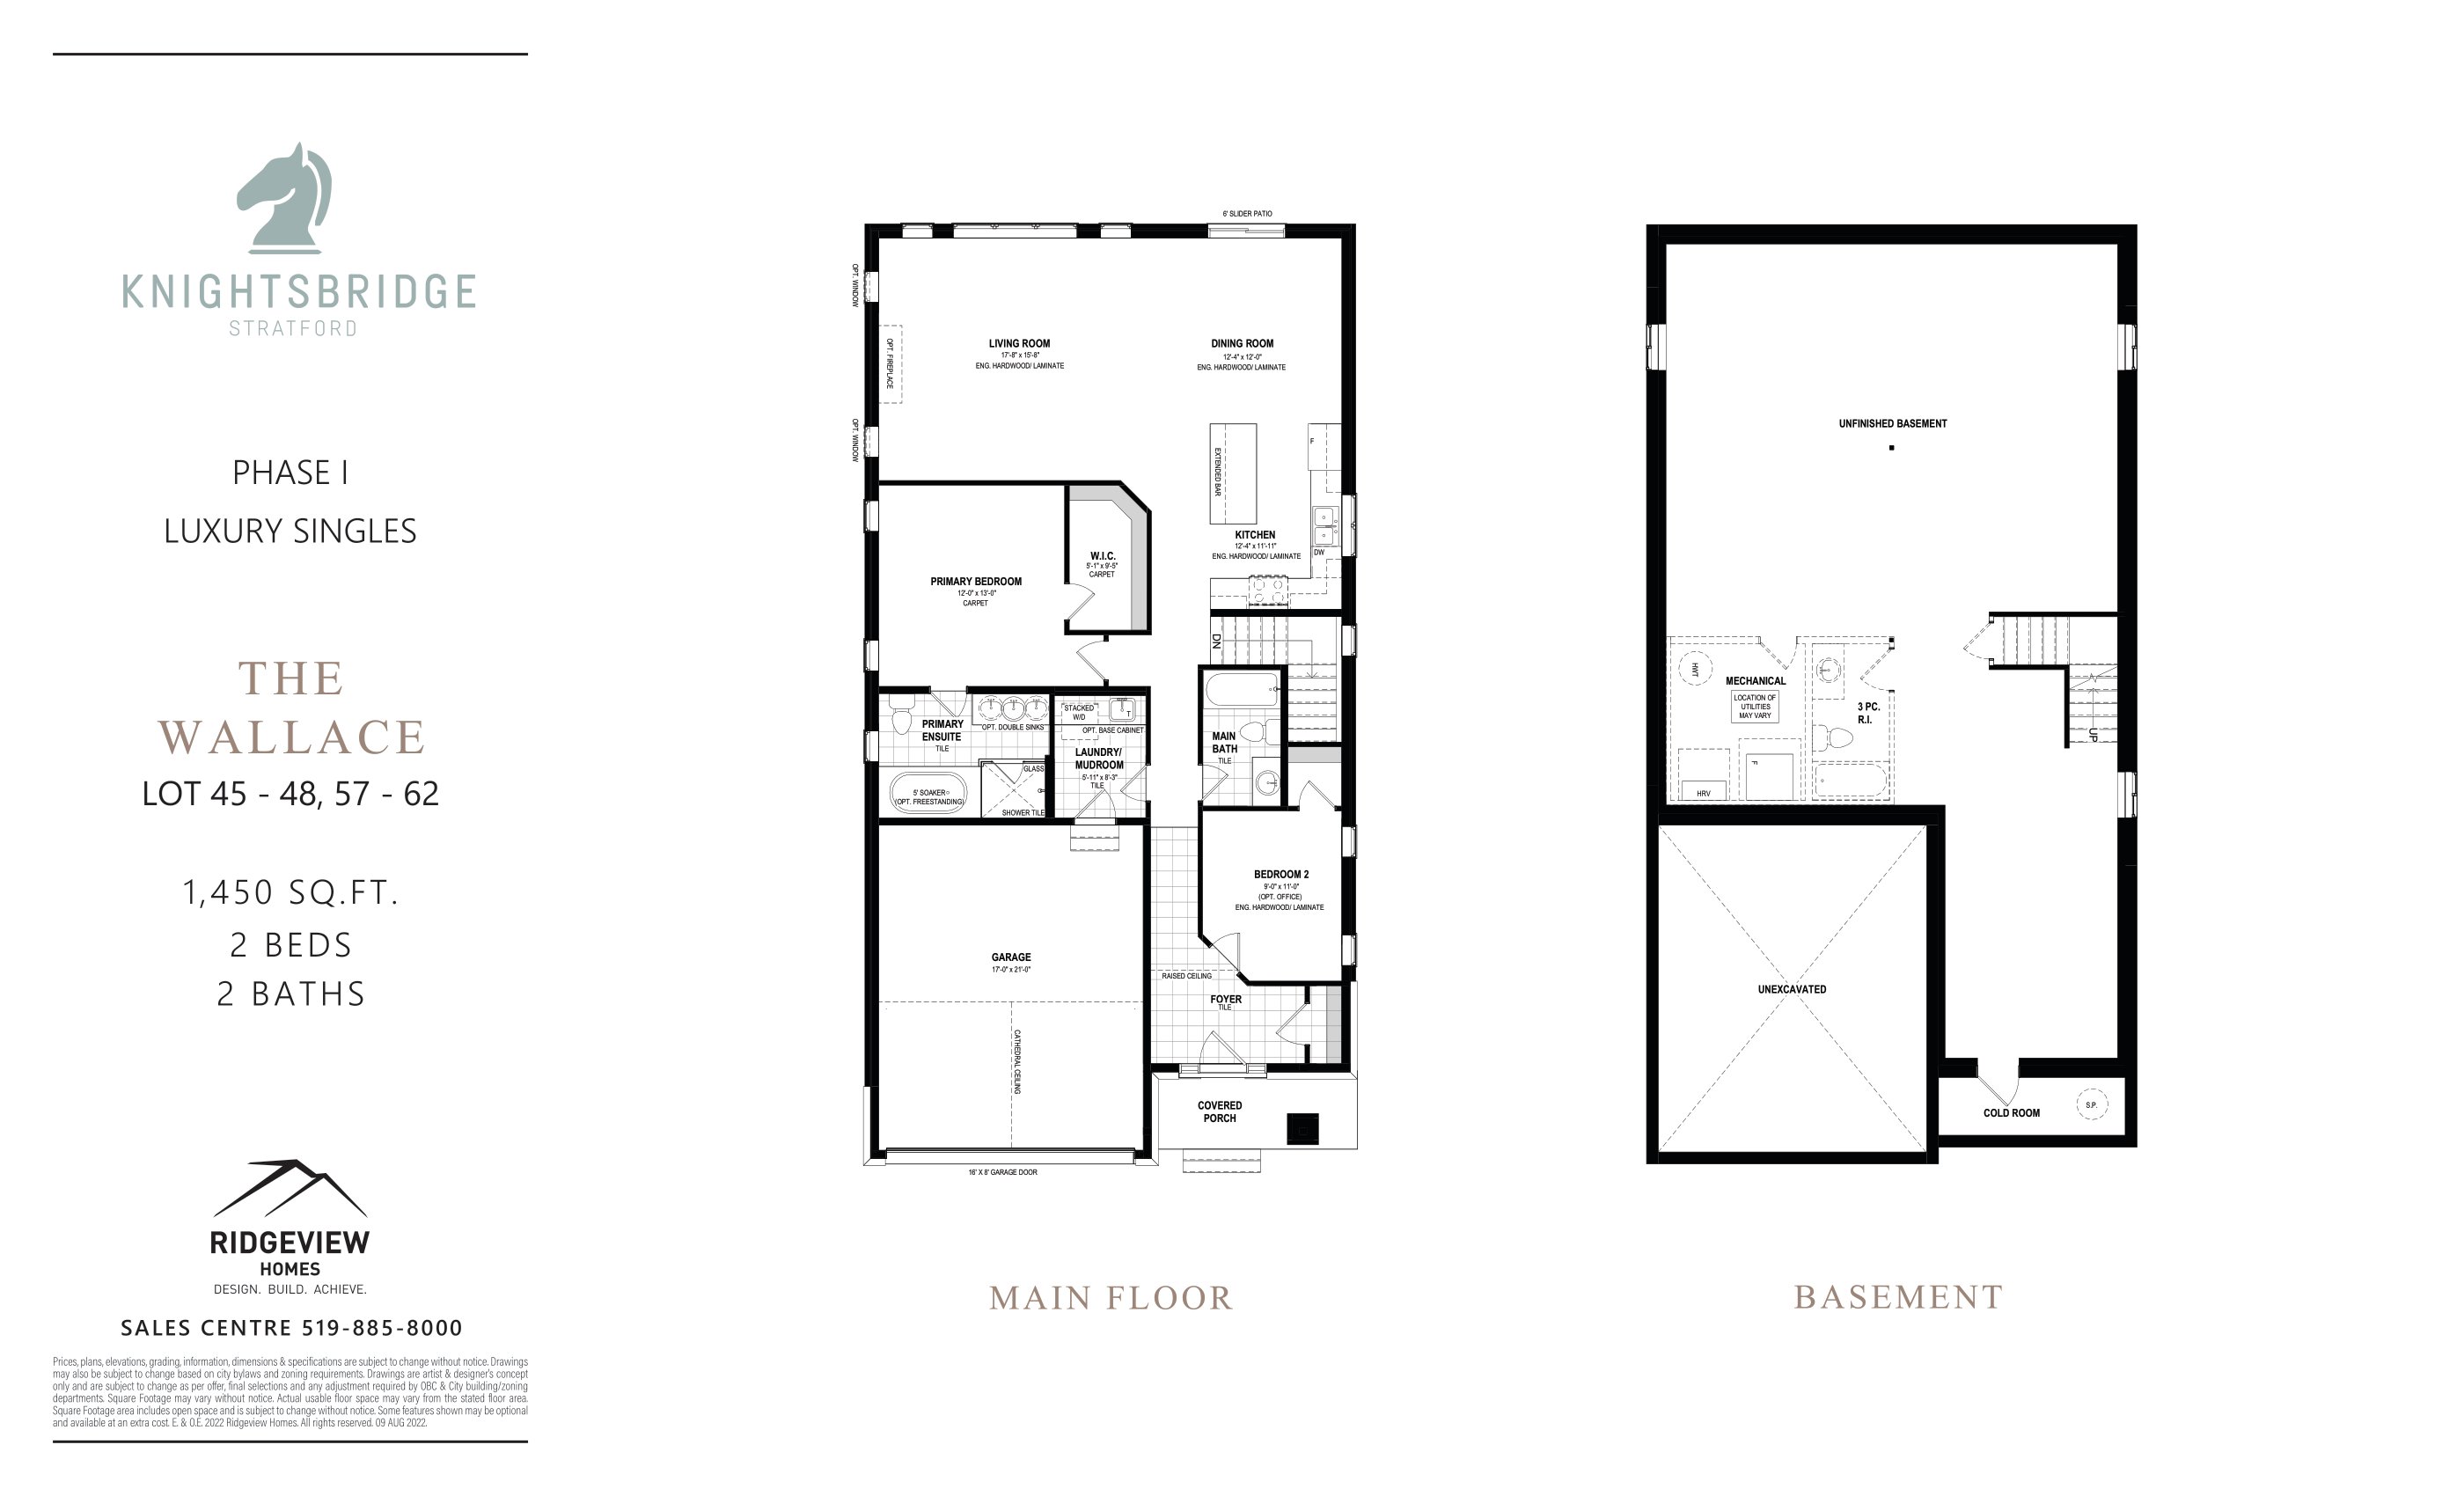  Floor Plan of Knightsbridge with undefined beds